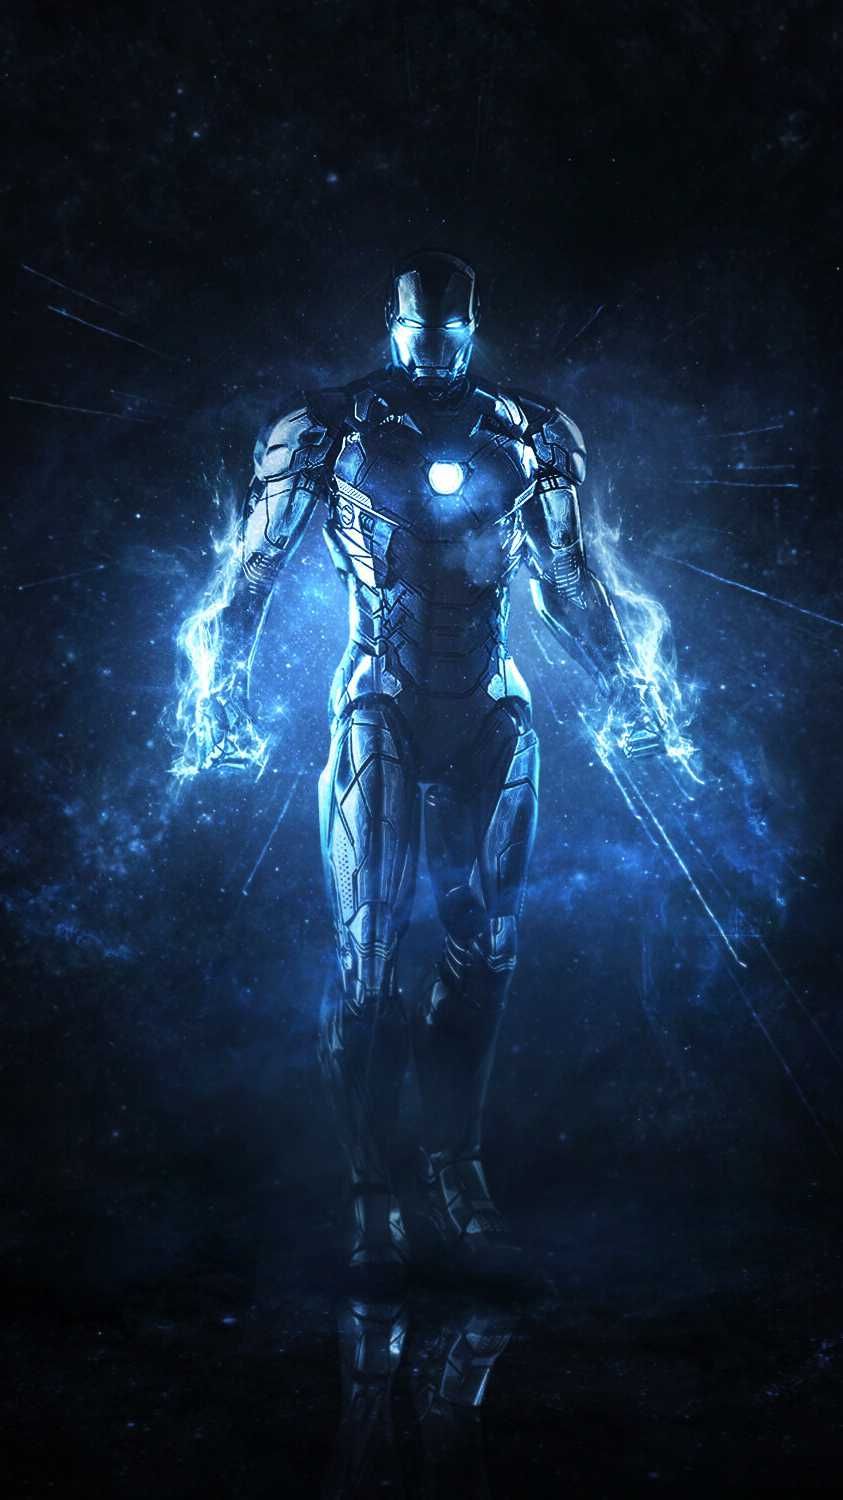 iPhone Wallpaper for iPhone iPhone 8 Plus, iPhone 6s, iPhone 6s Plus, iPhone X and iPod Touch High Qu. Iron man avengers, Marvel wallpaper, Iron man wallpaper